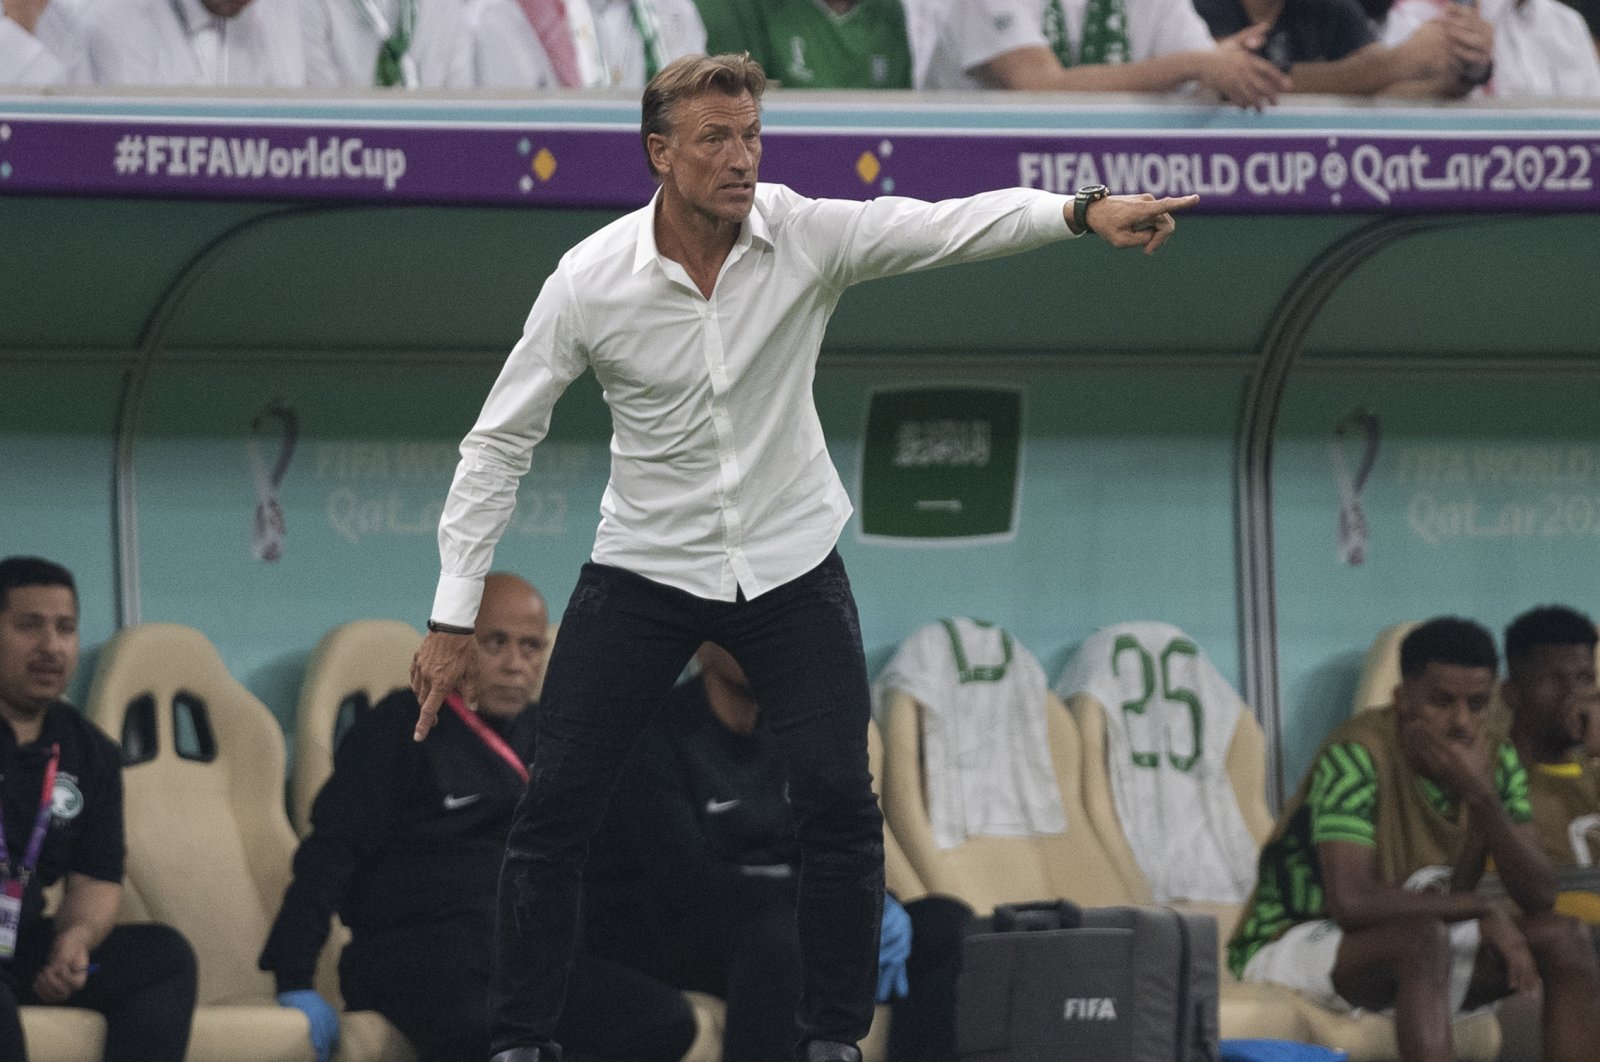 Saudi Arabia manager Herve Renard during the FIFA World Cup Qatar 2022 Group C match between Saudi Arabia and Mexico at Lusail Stadium, Lusail City, Qatar, Nov. 30, 2022. (Getty Images Photo)